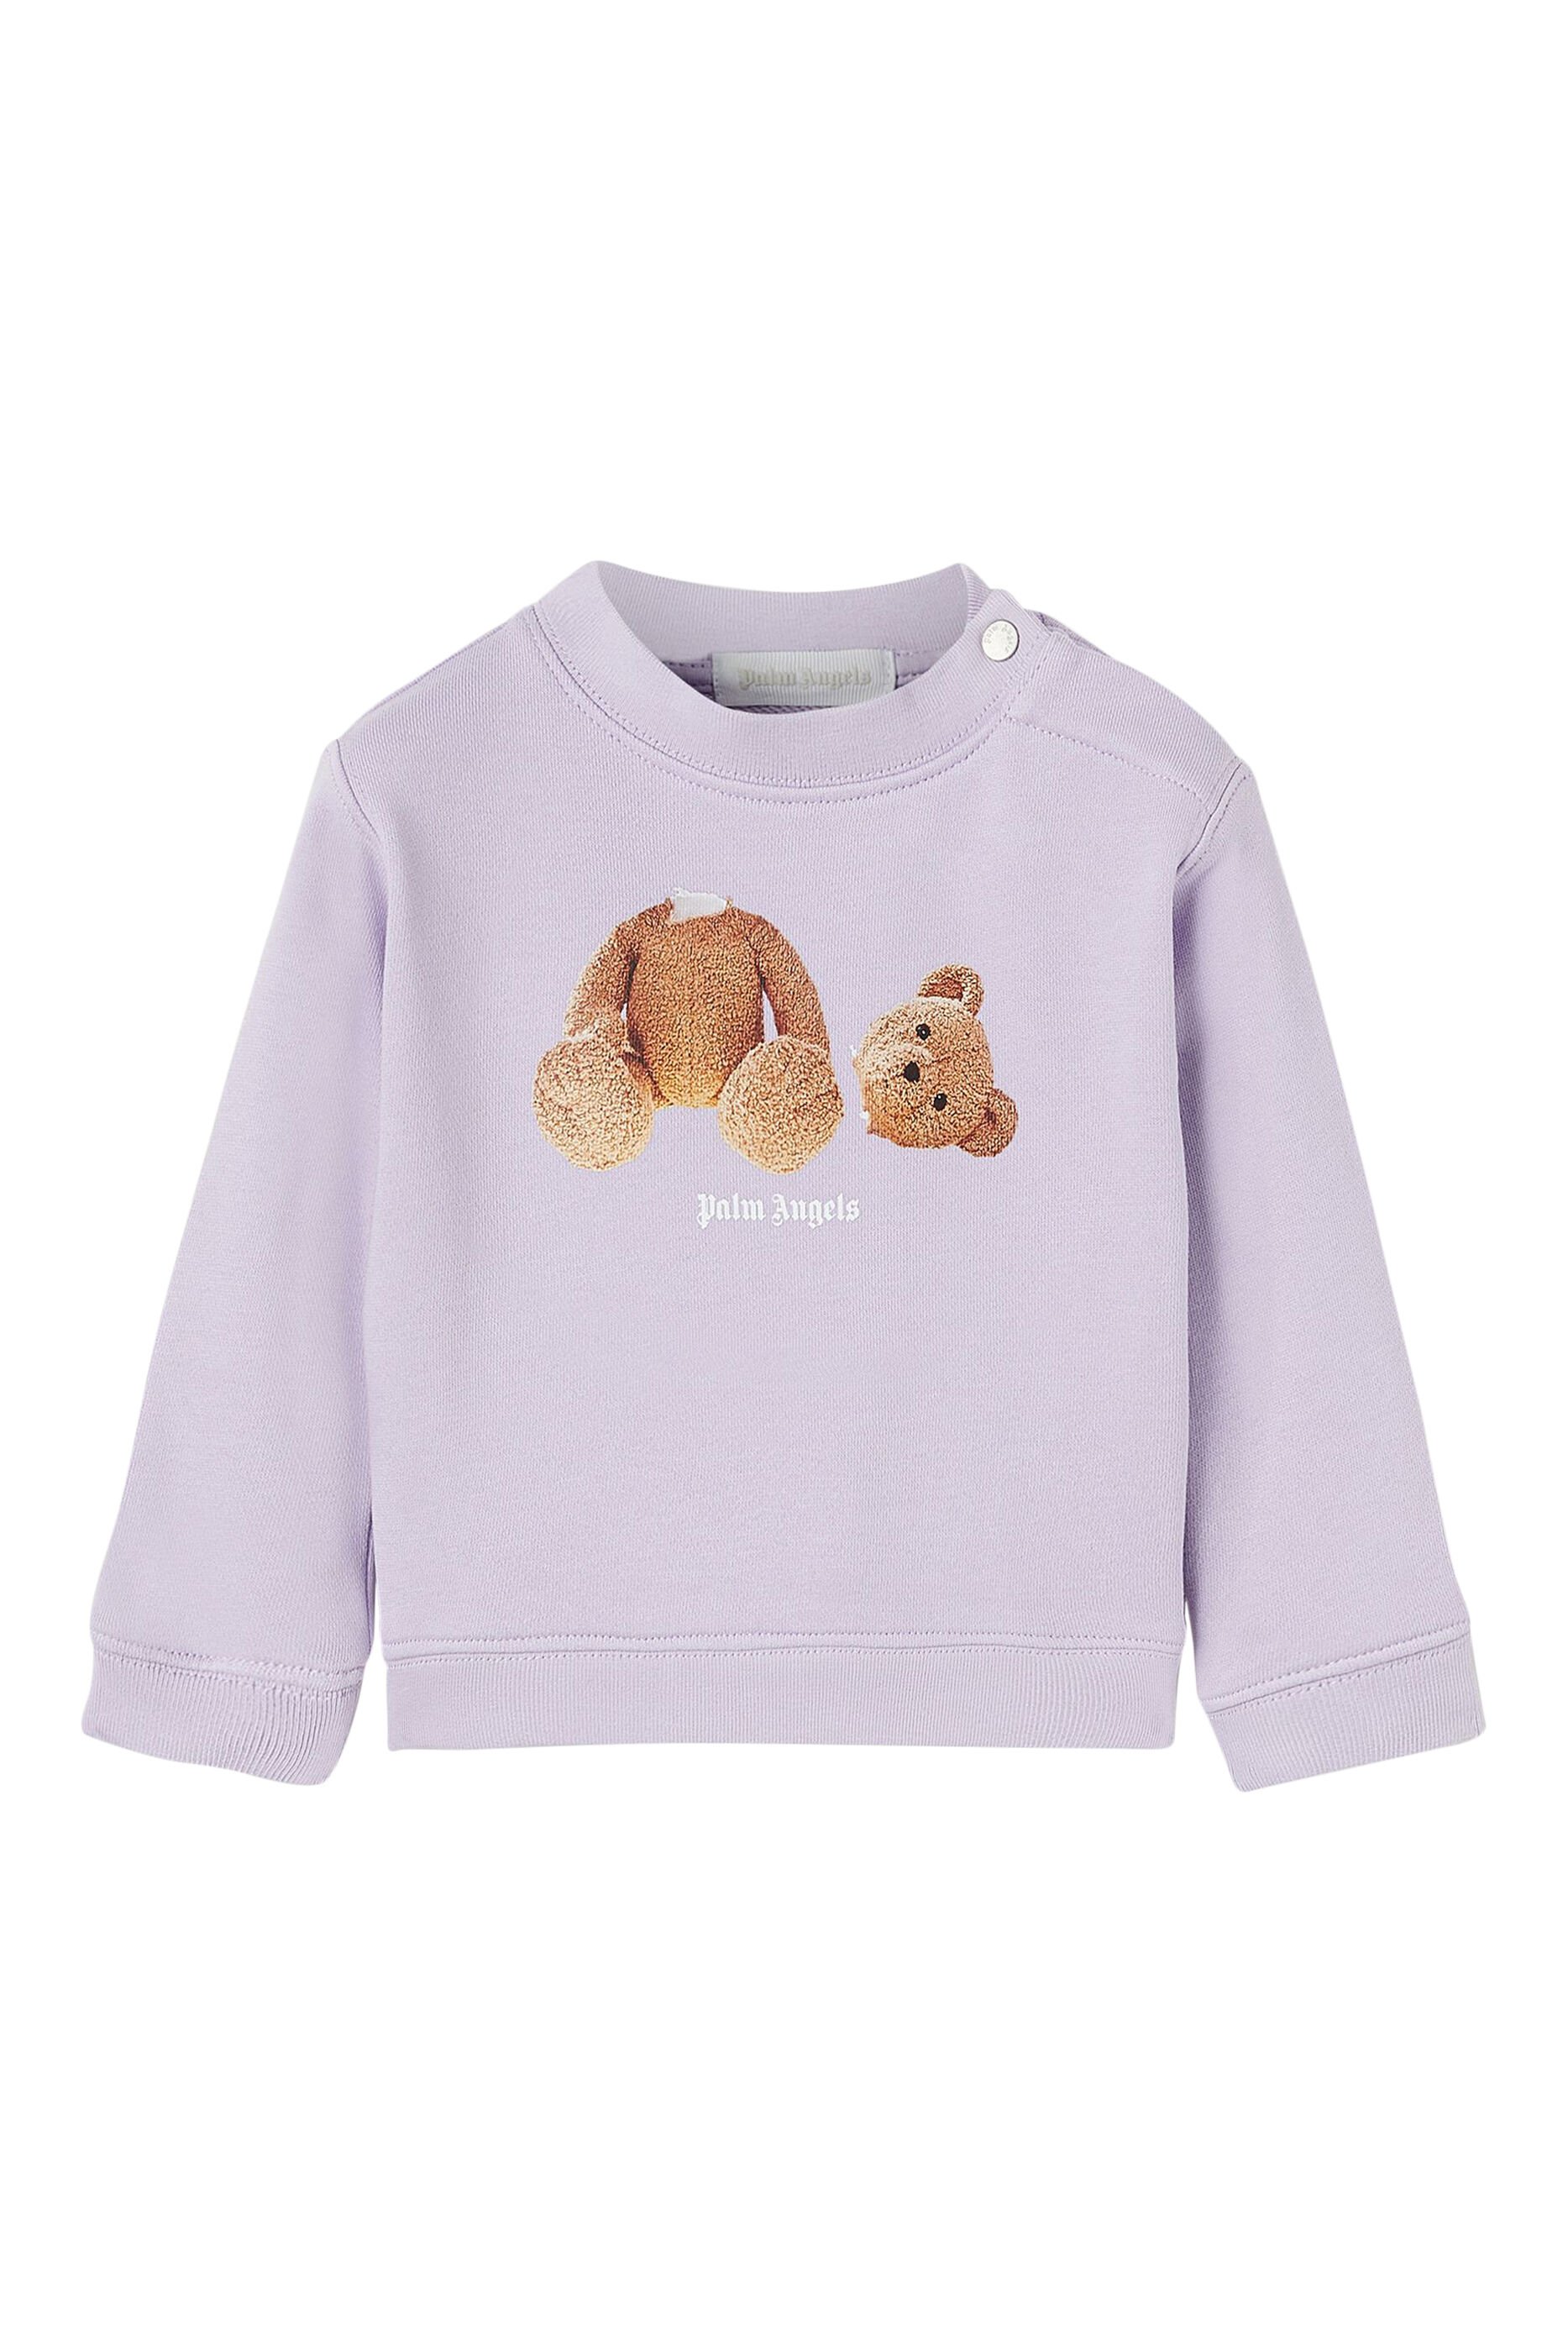 Palm Angels Kids HOODIE WITH PEISLY TEDDY WHITE NAVY BLUE